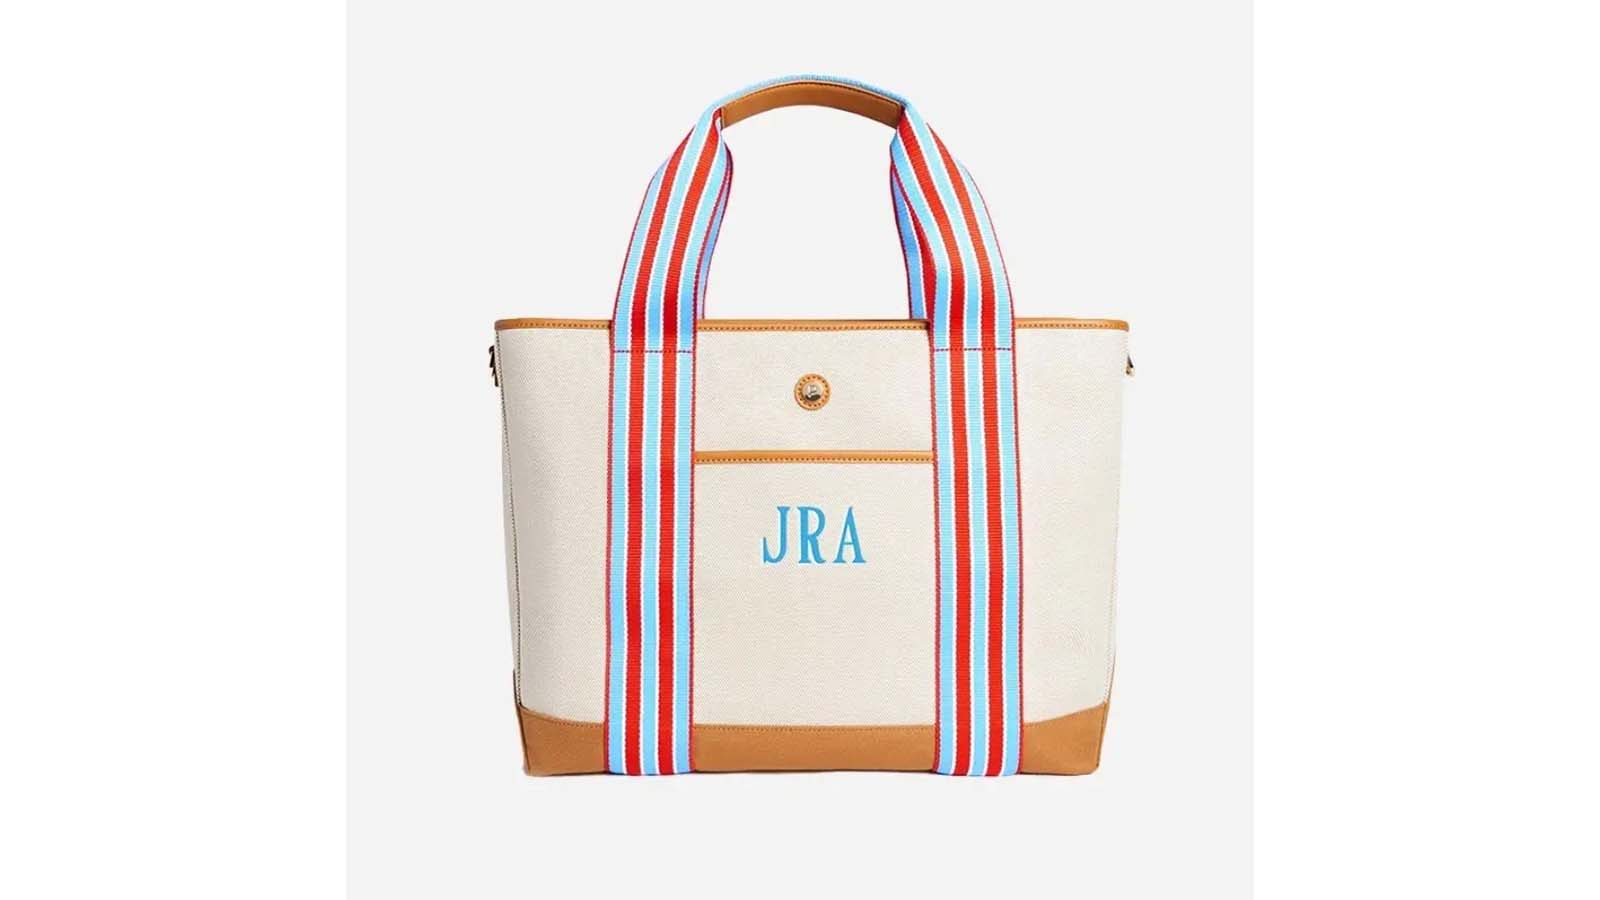 The Paravel x Stephanie Fishwick Cabana Tote Is My New Favorite Bag